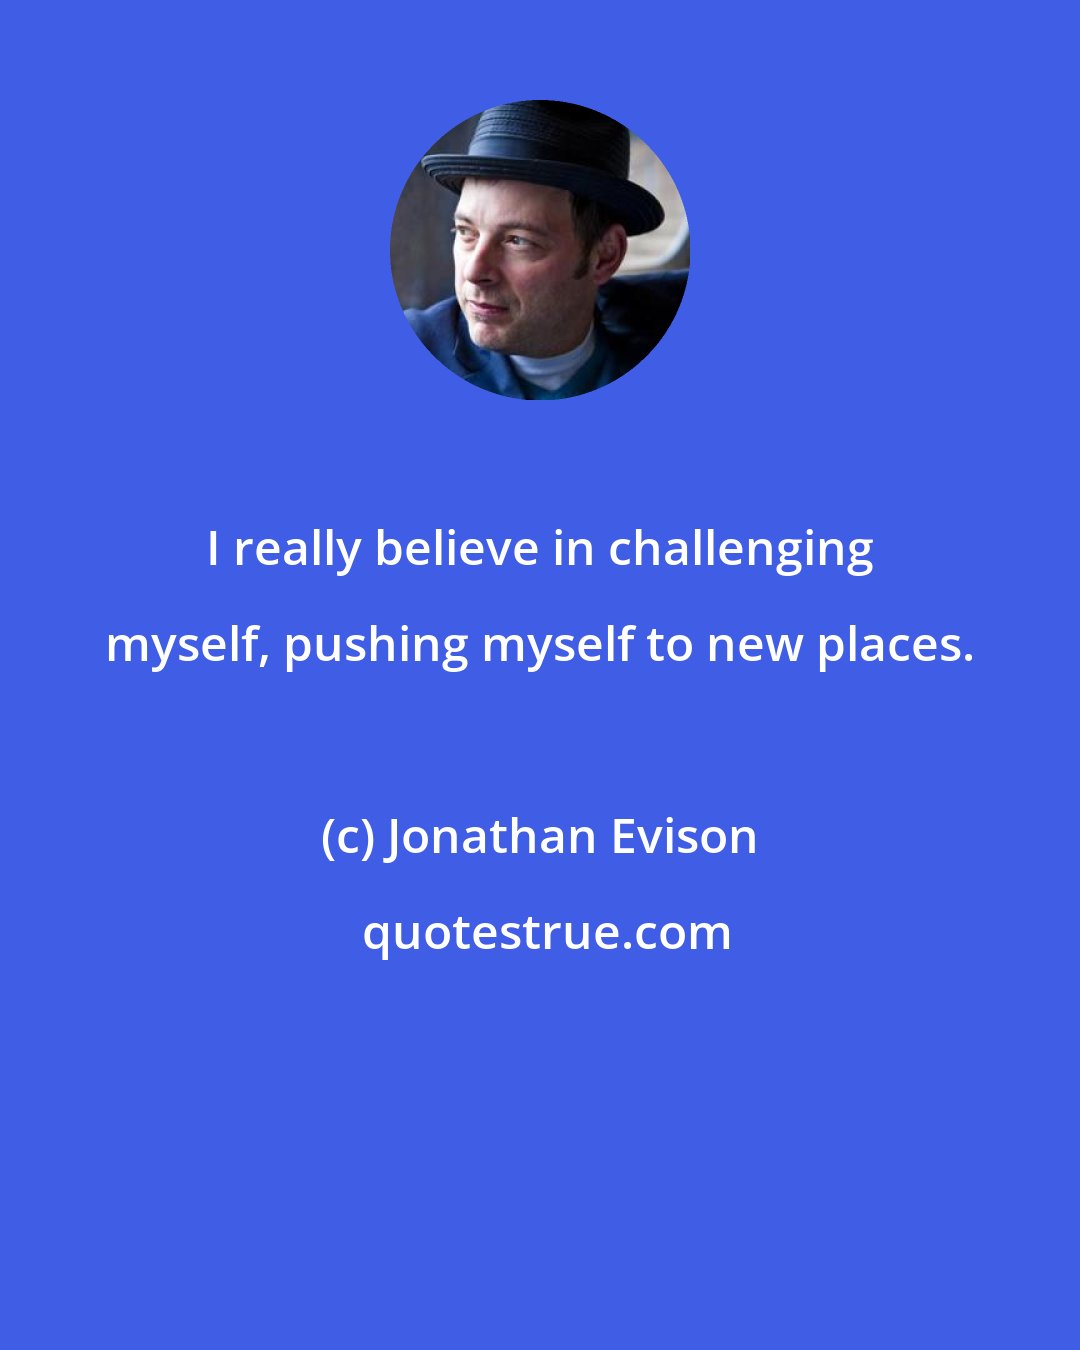 Jonathan Evison: I really believe in challenging myself, pushing myself to new places.